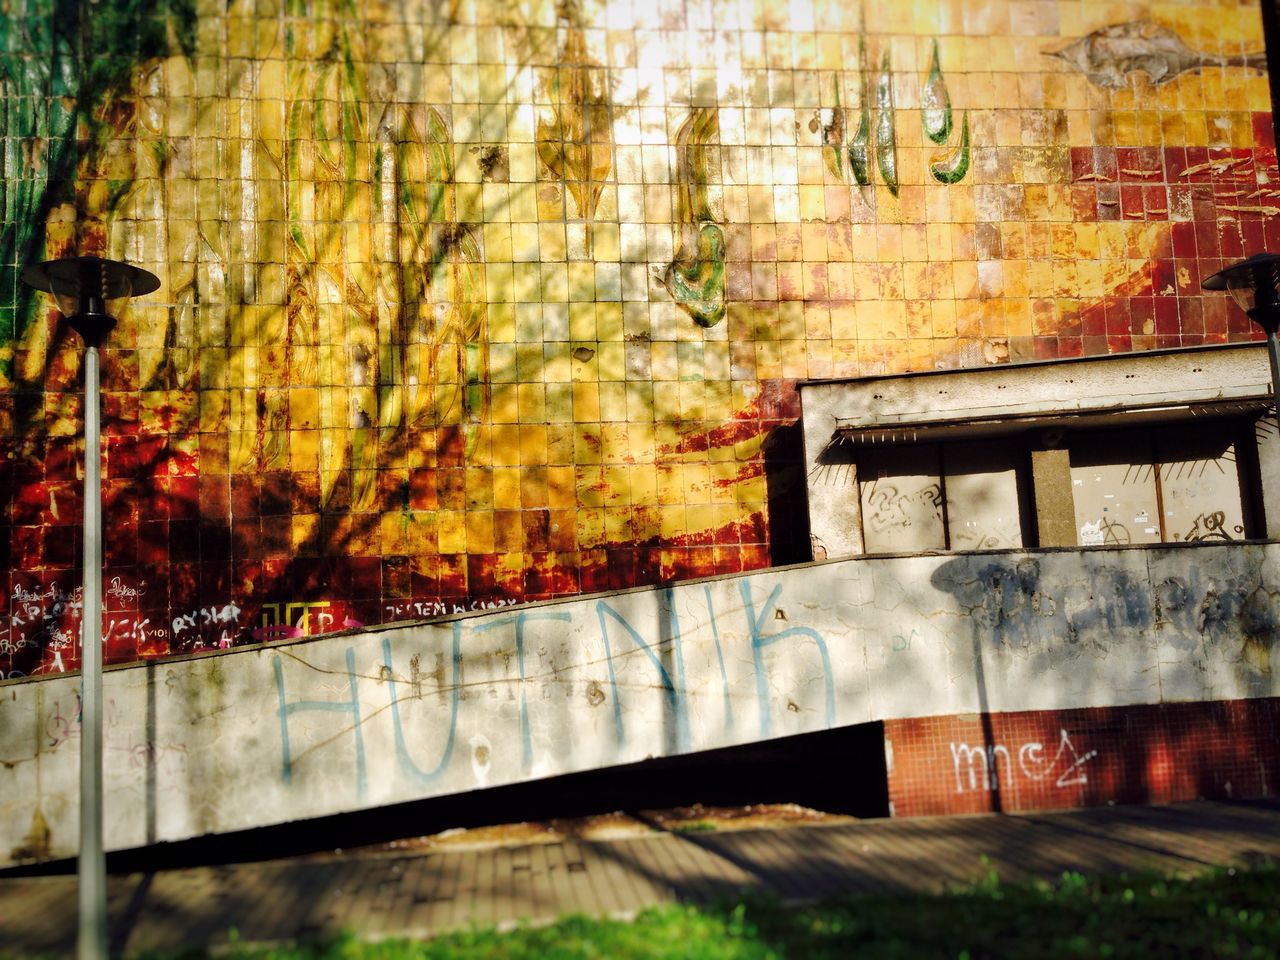 graffiti, built structure, architecture, building exterior, wall - building feature, multi colored, abandoned, no people, outdoors, house, brick wall, weathered, old, wall, damaged, transportation, day, obsolete, deterioration, window